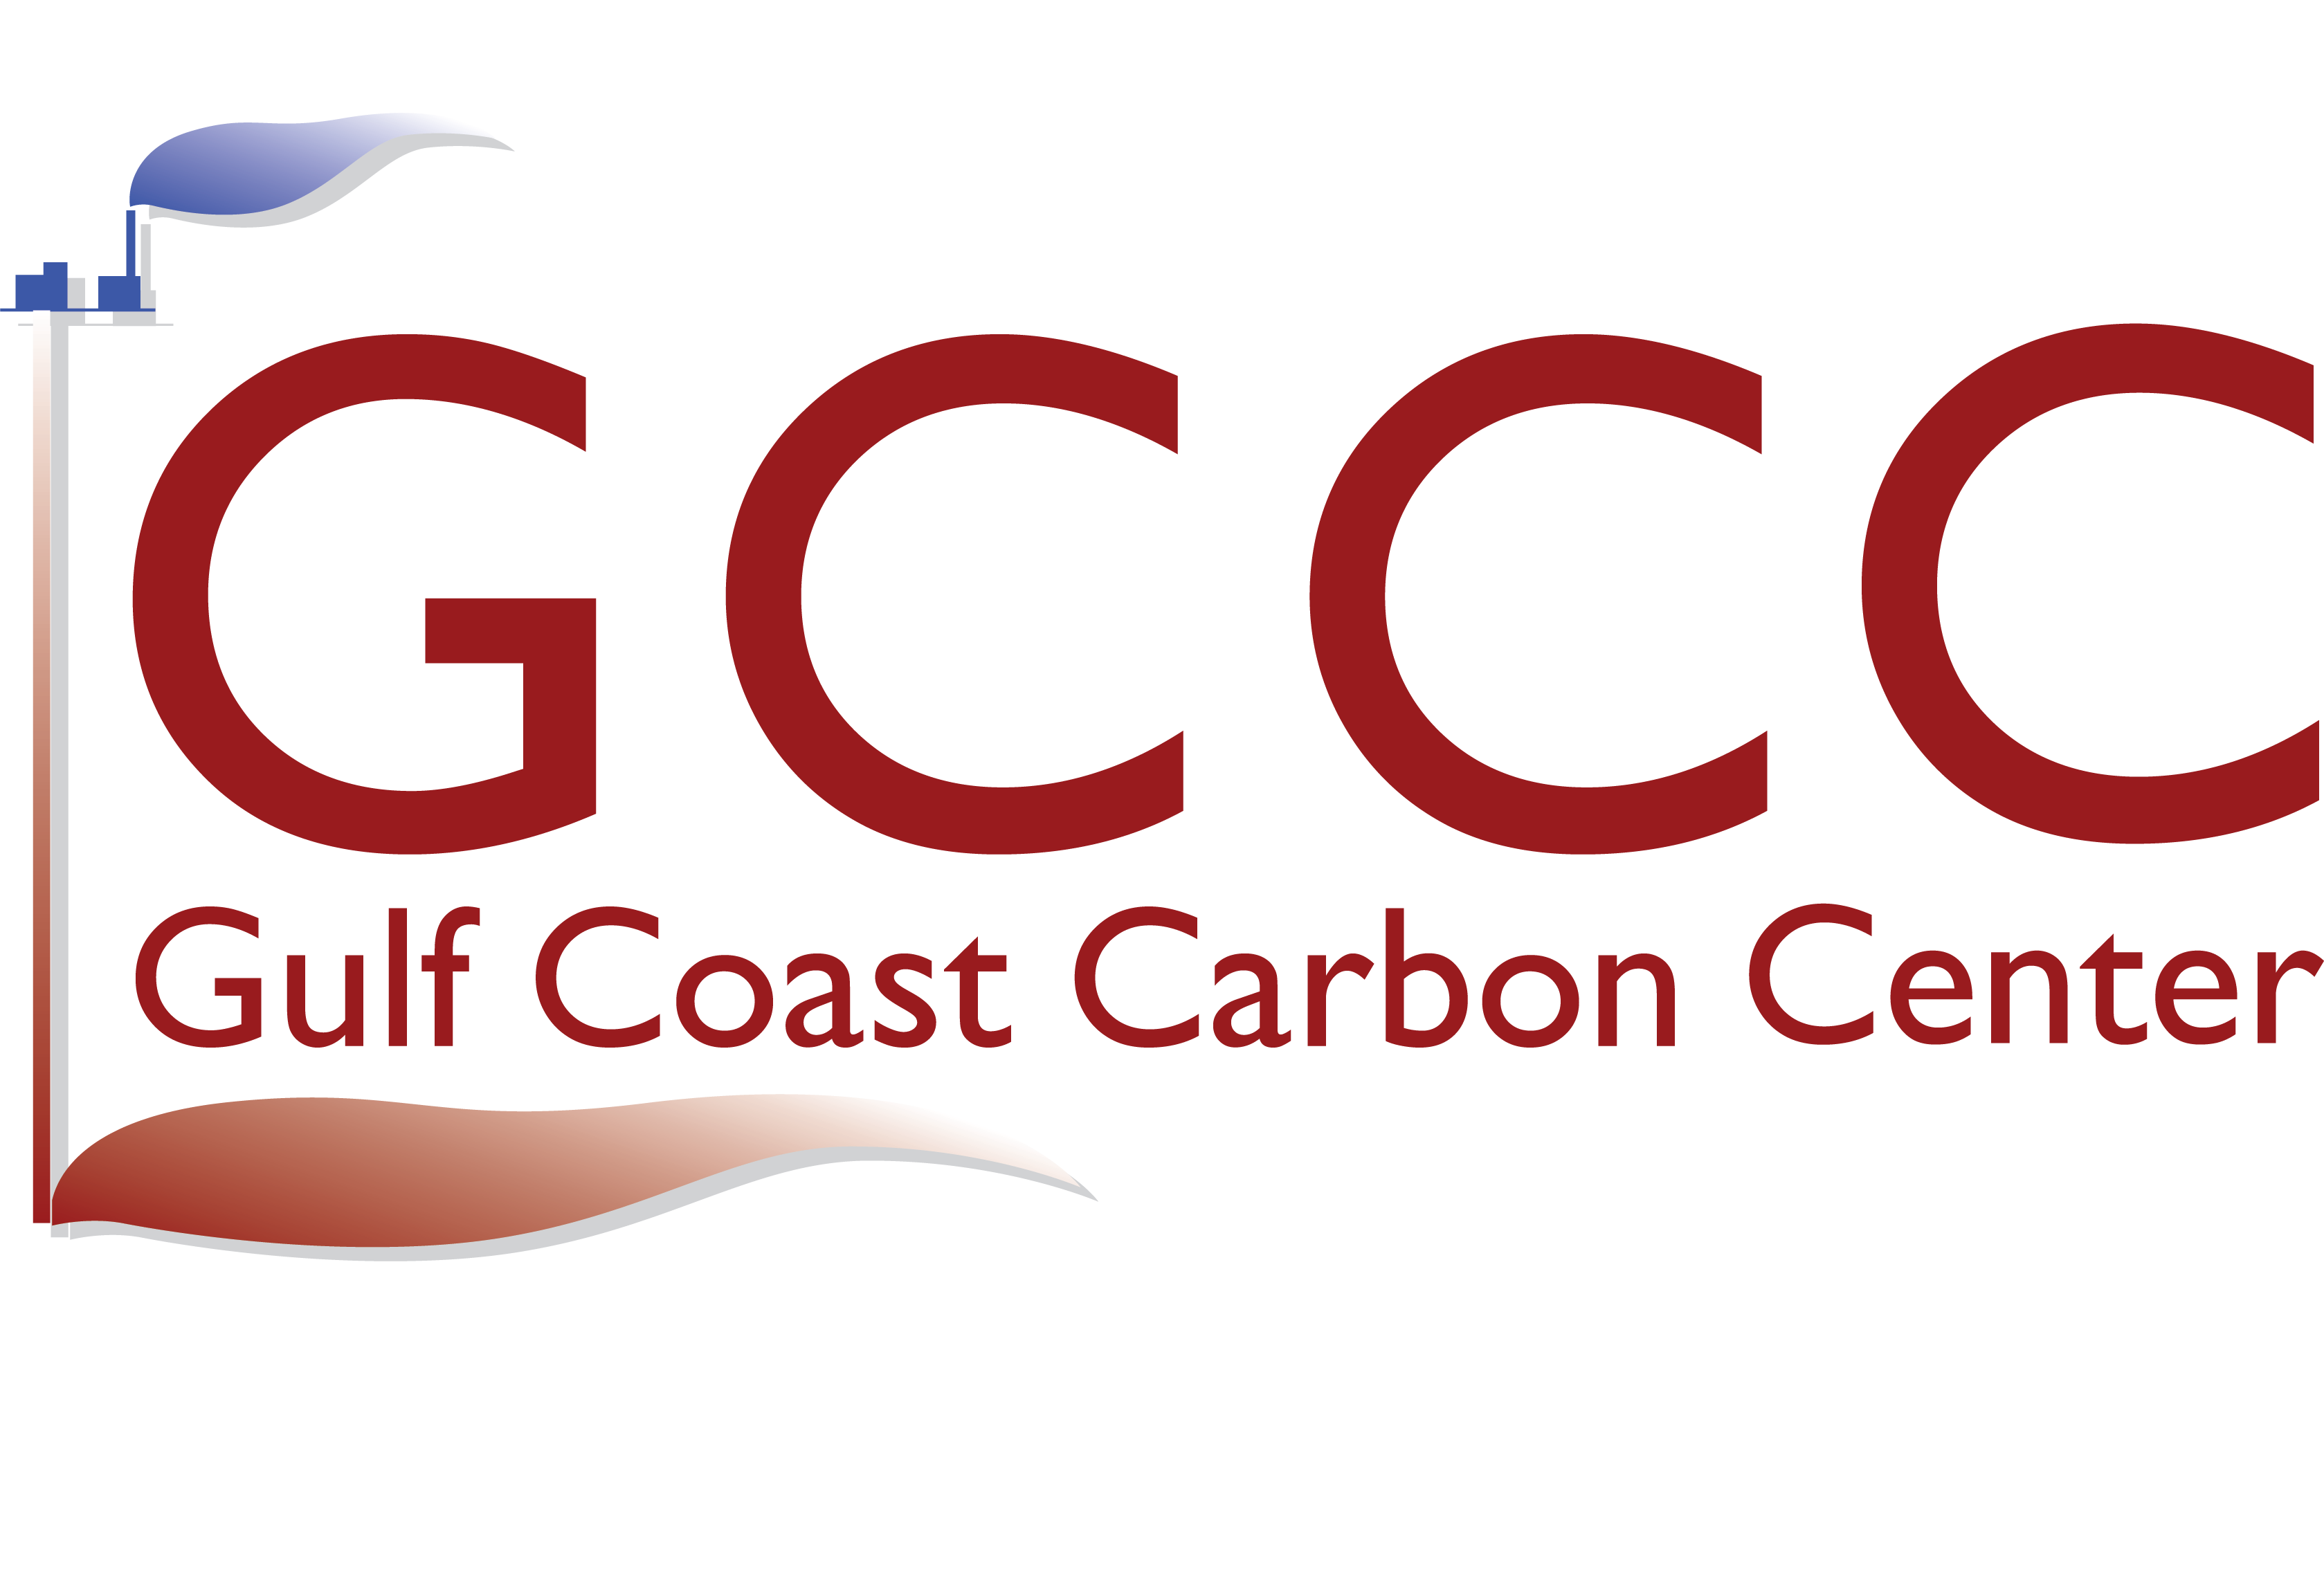 Project leader GCCC logo